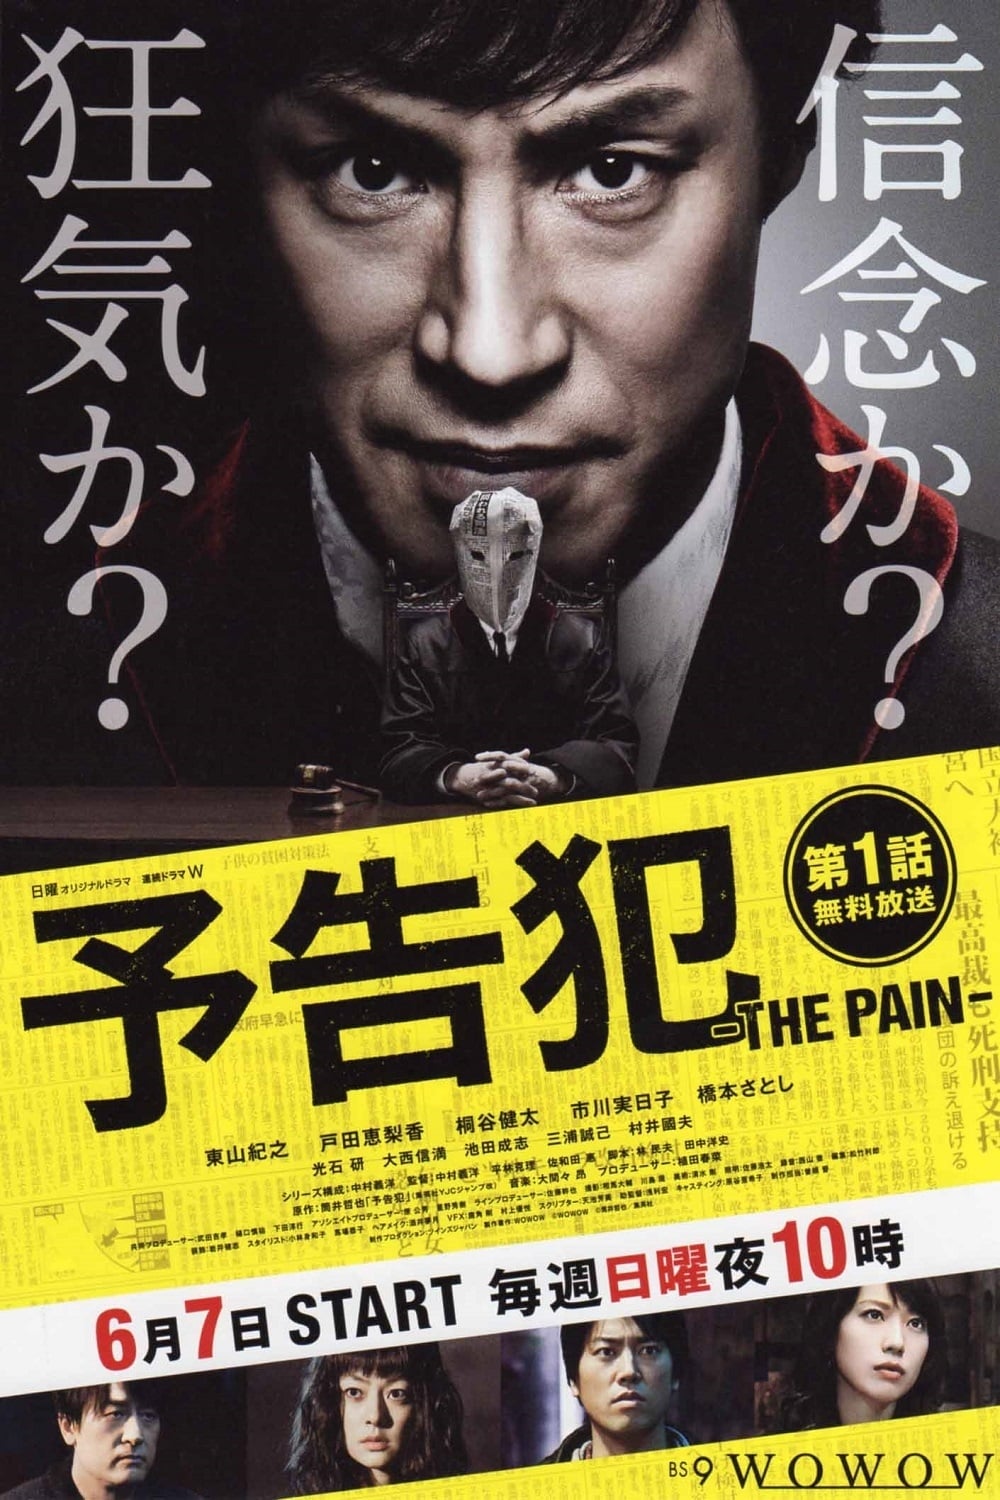 Yokokuhan The Pain 15 Tv Series Where To Watch Streaming Online Reviews